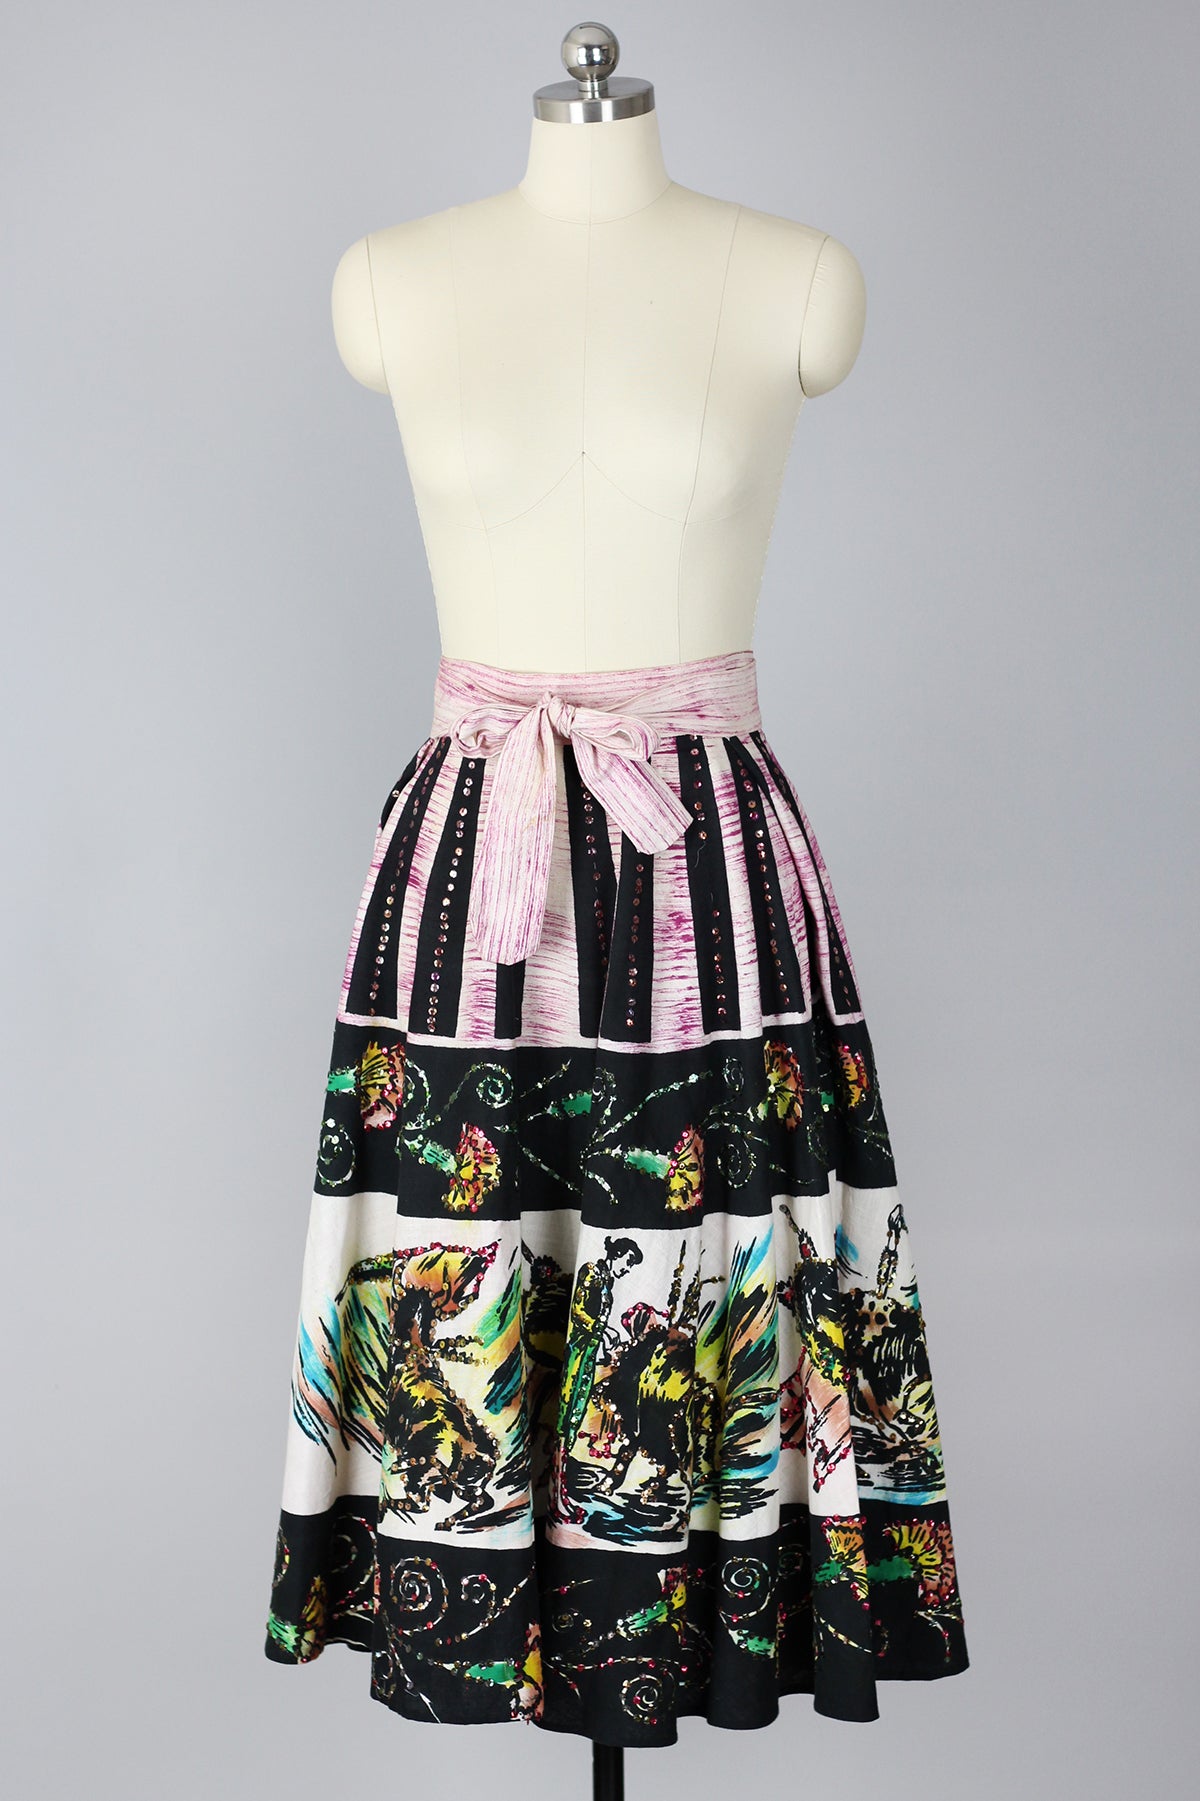 Rare 1940s-1950s Mexican Circle Skirt with Bull Fighters and Sequins